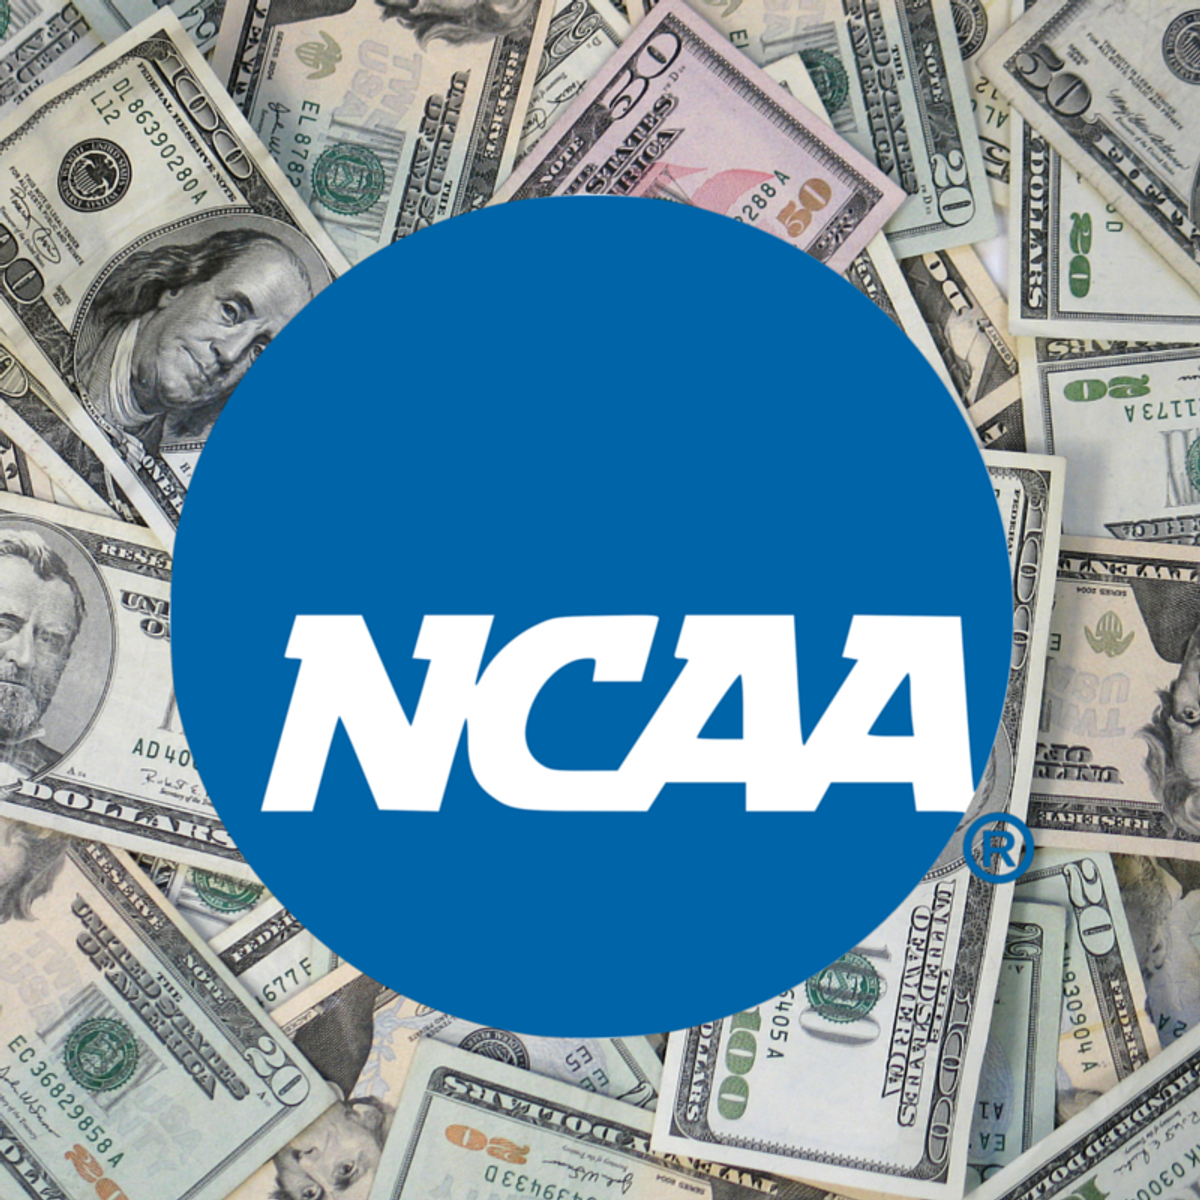 Its Time For The NCAA To Compensate Those Who Make Them Money